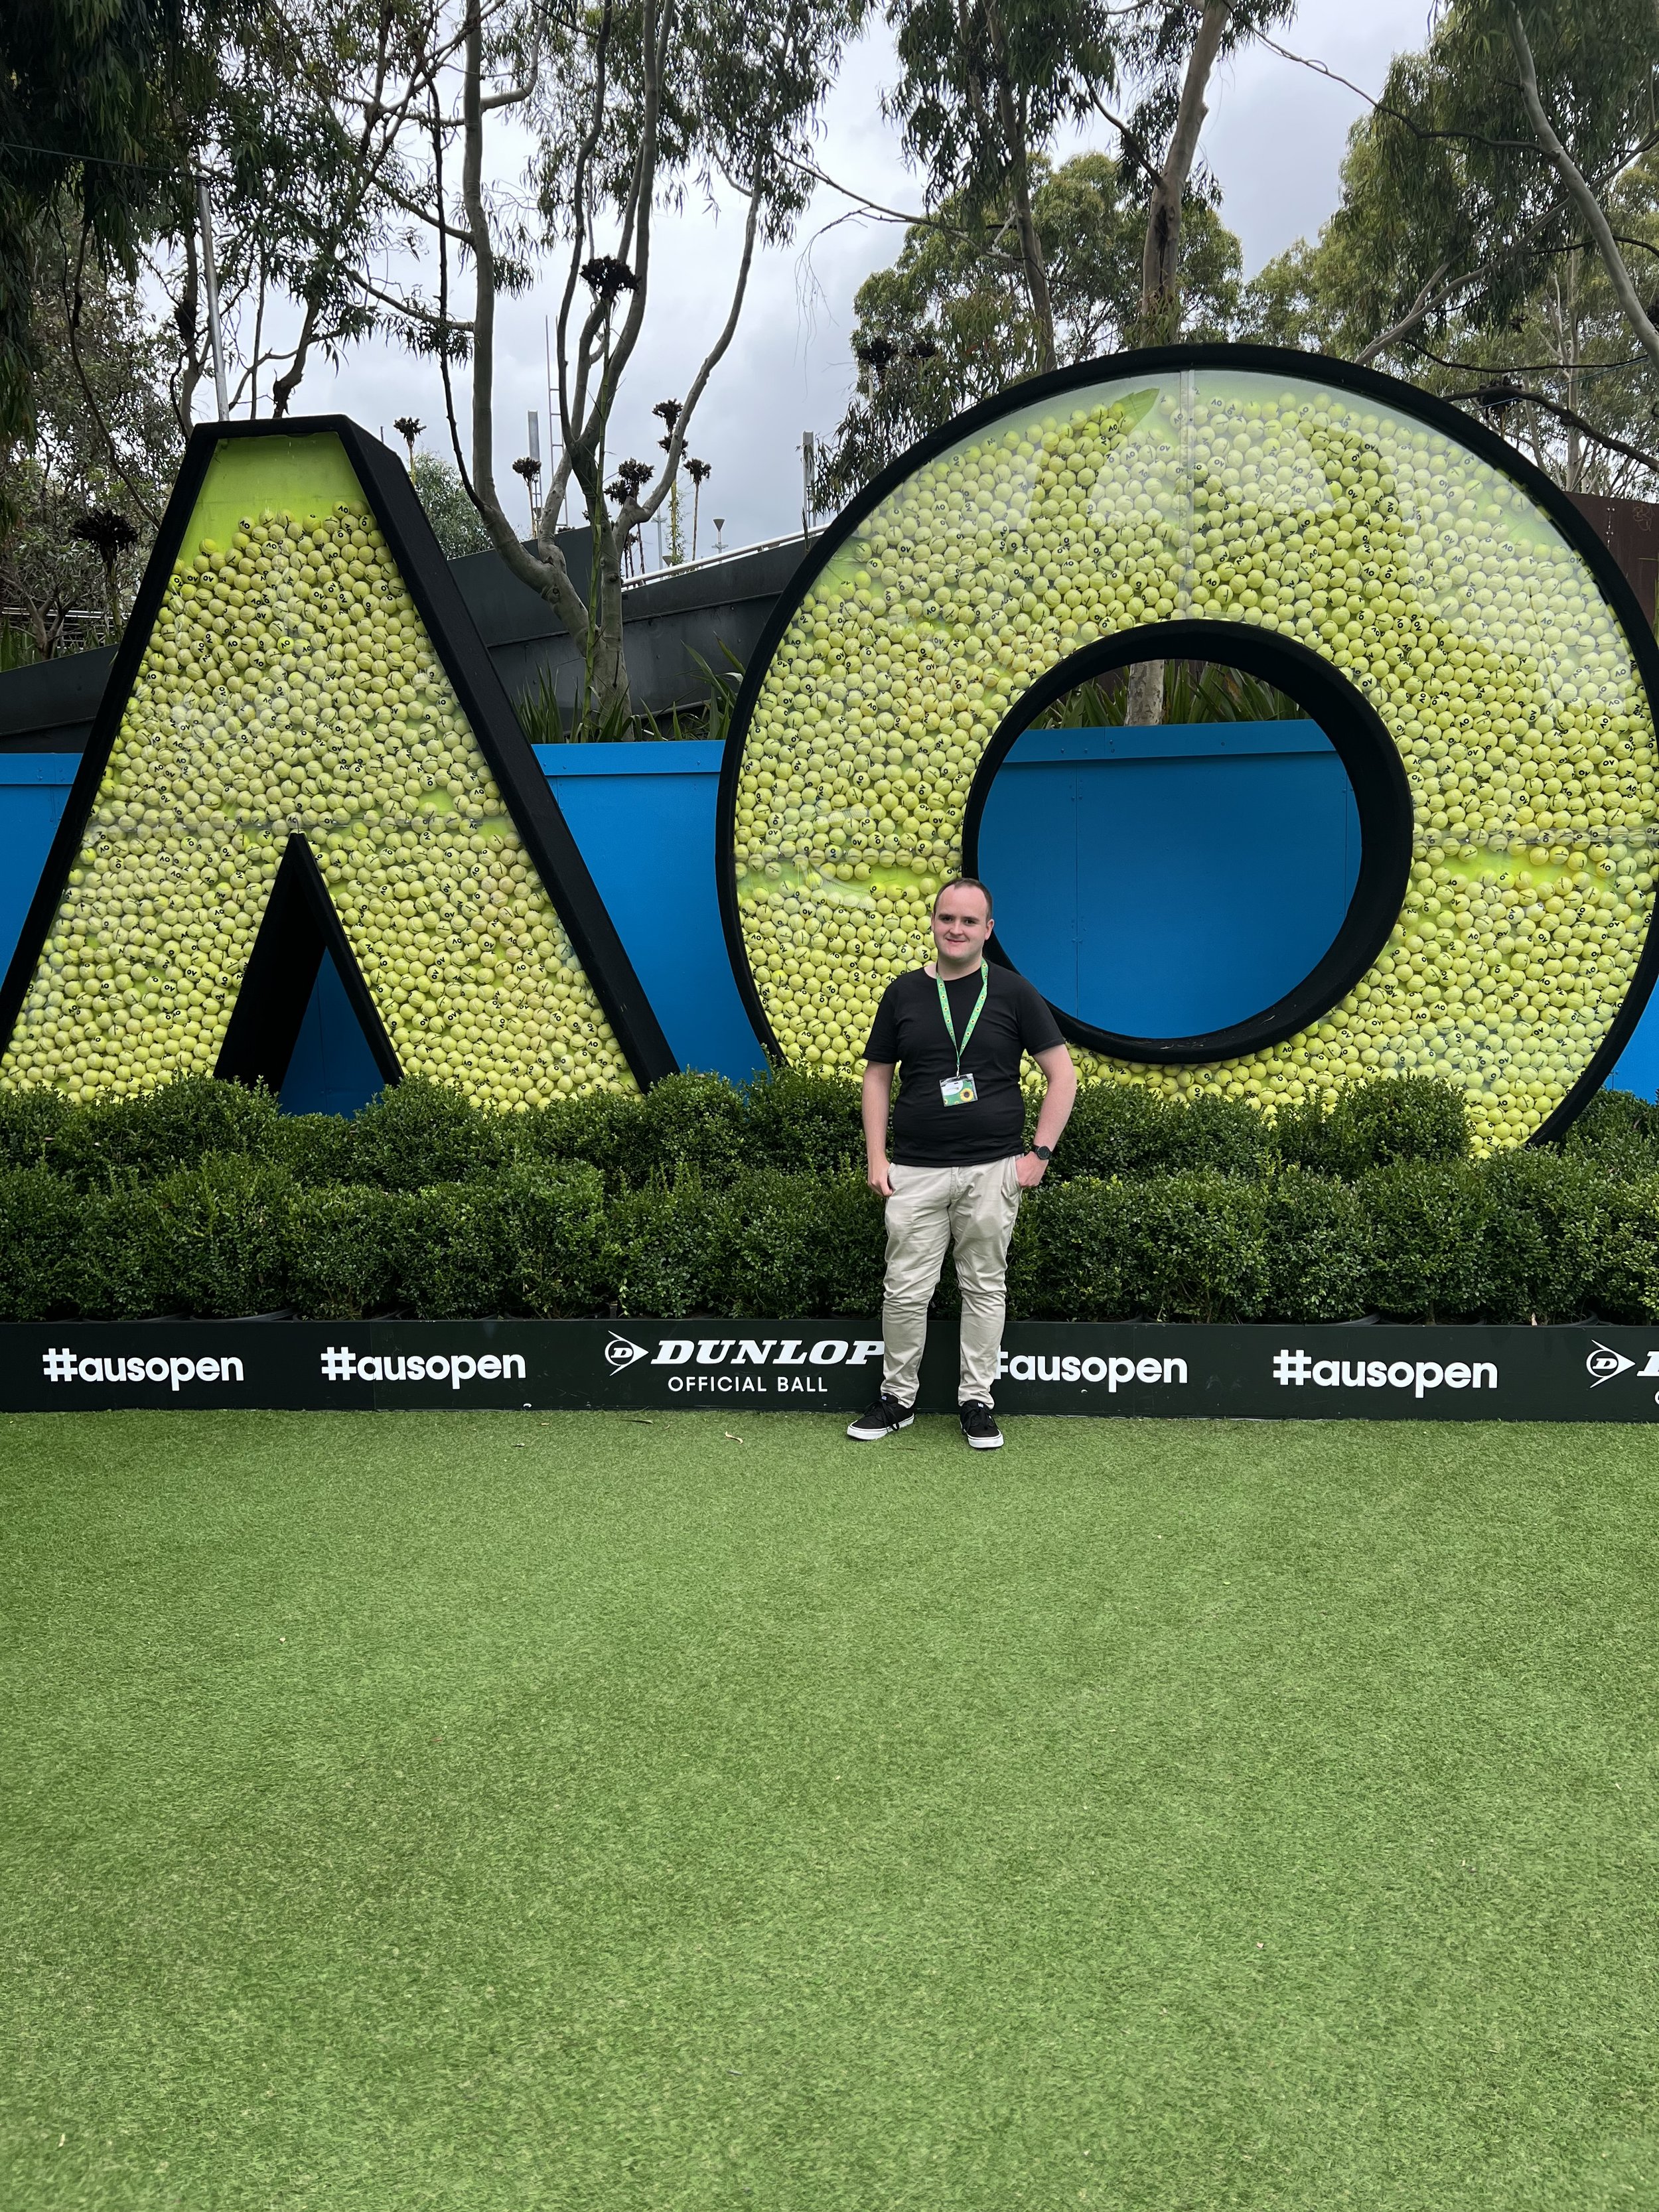    Image 1: Bryce standing in front of a giant Australian Open logo (AO) the Letters are filled with tennis balls. Bryce is wearing stone coloured long pant, a black t-shirt and a green lanyard with sunflowers on it.   